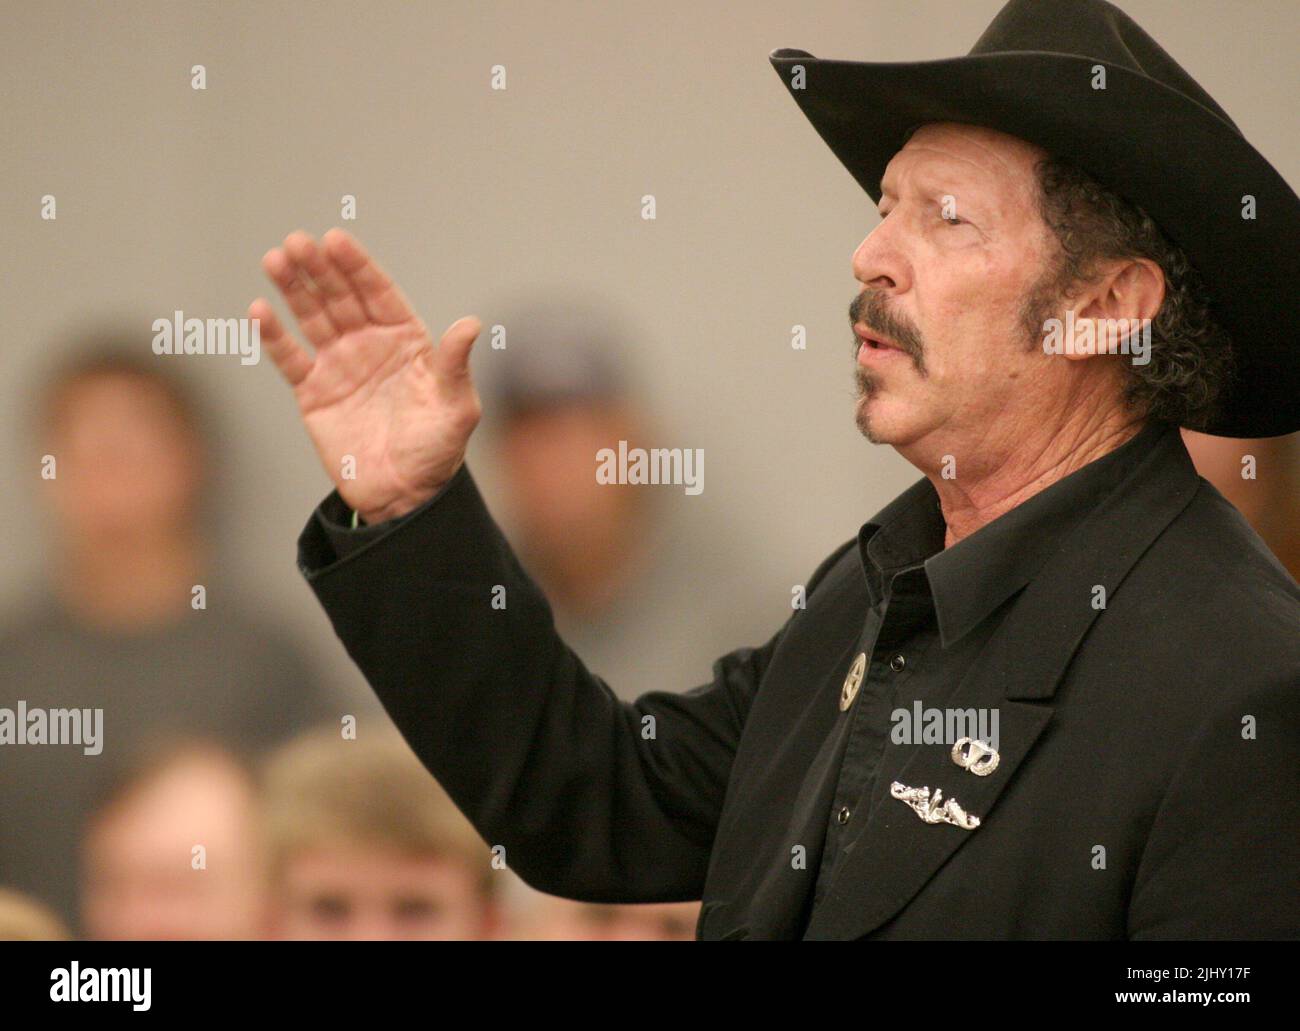 Kinky Friedman campaigns for governor of Texas on Thursday, Nov. 2, 2006 at Smith Entrepreneur Hall on the Texas Christian University campus in Fort Worth, Tarrant County, TX, USA. Friedman, 62, is a singer, songwriter, author and humorist who is one of two independent gubernatorial candidates hoping to unseat incumbent Republican Gov. Rick Perry to become the Lonestar State's first independent governor since Sam Houston in 1859. (Apex MediaWire Photo by Timothy J. Jones) Stock Photo